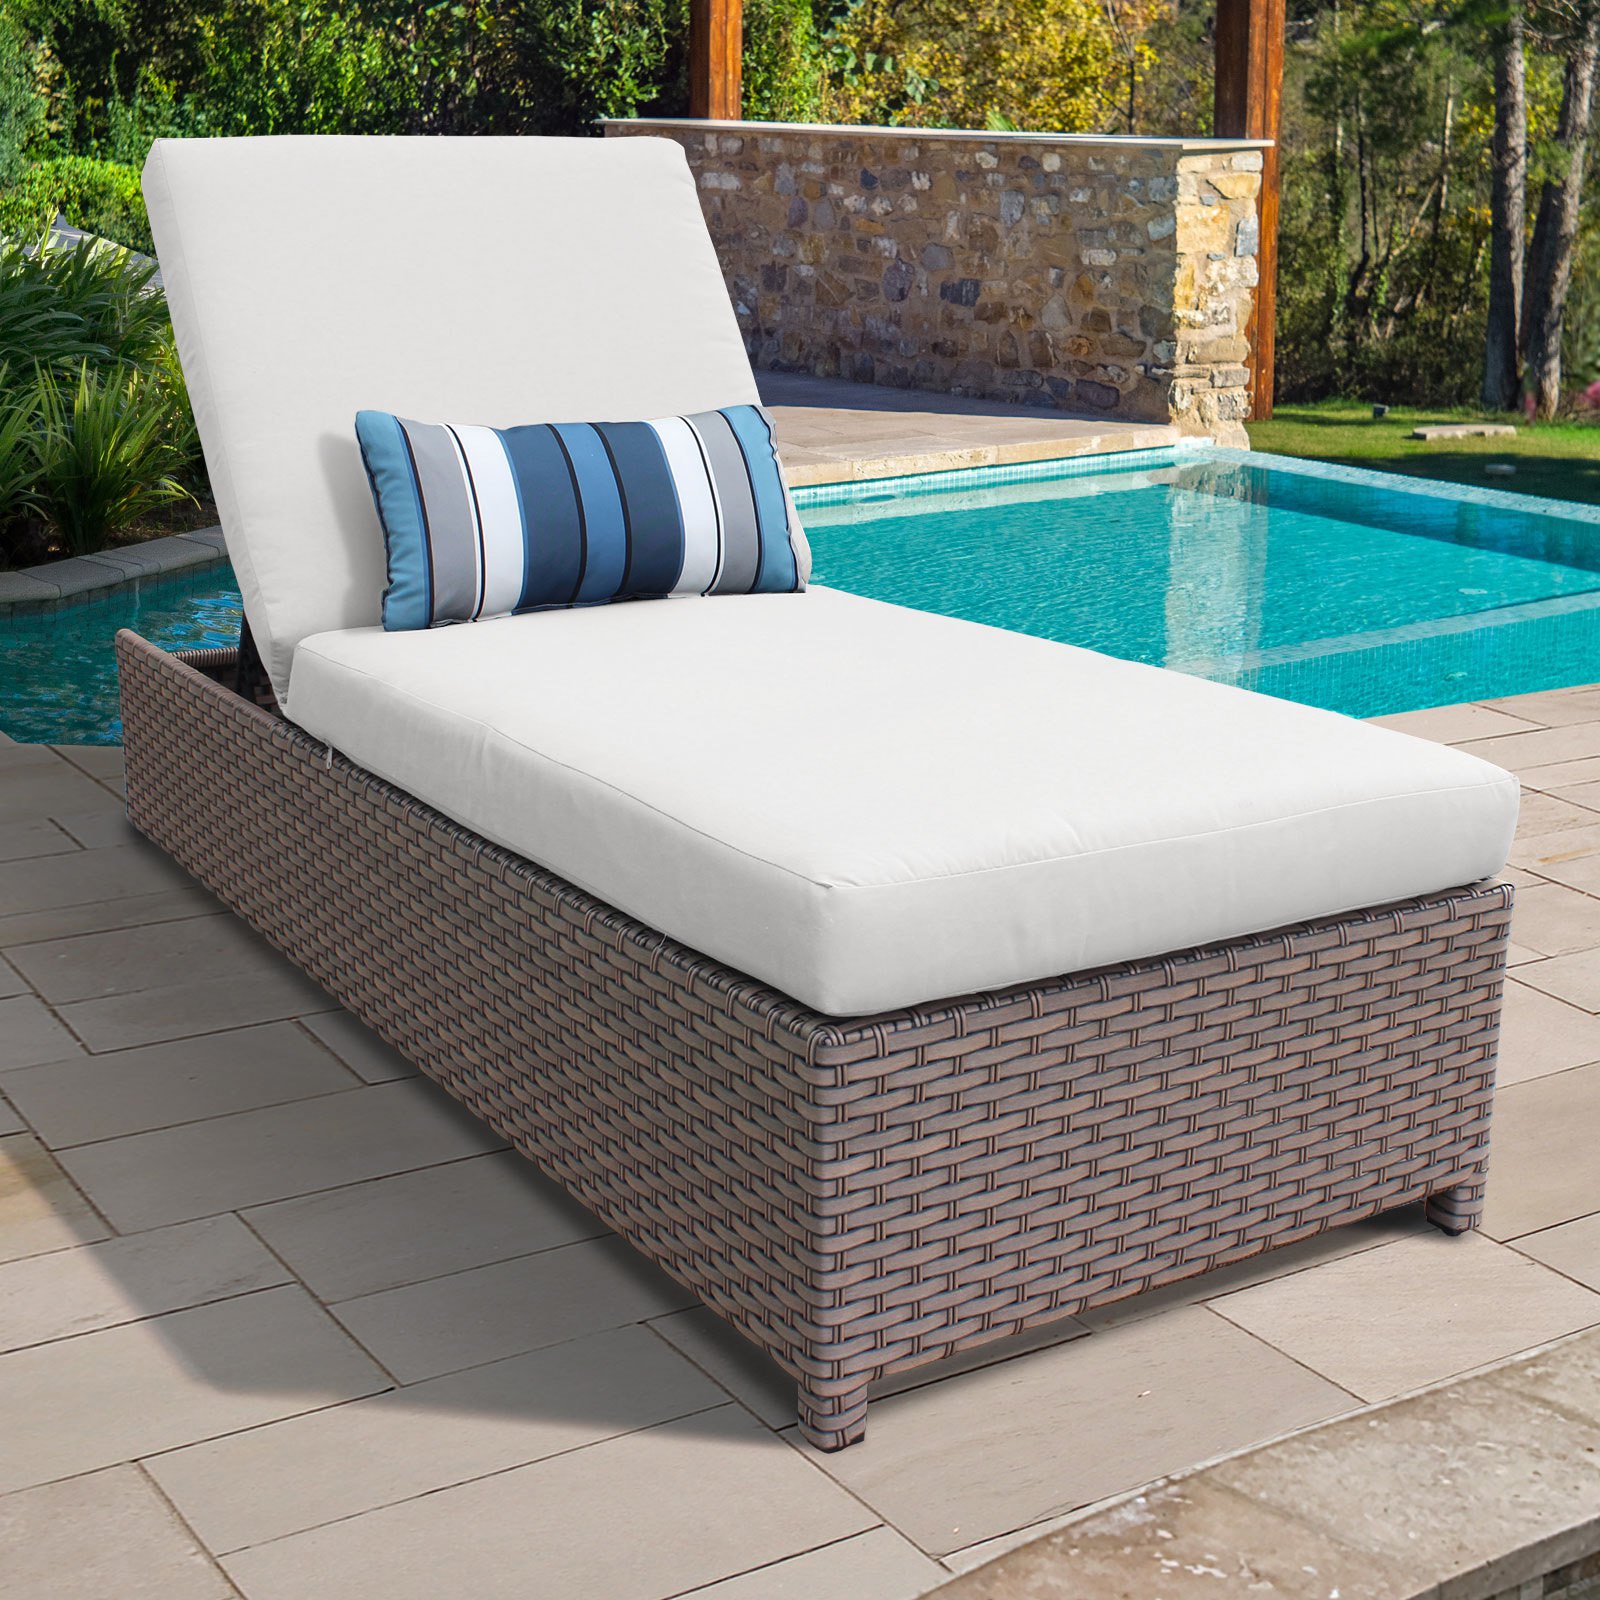 TK Classics Florence Wheeled Wicker Outdoor Chaise Lounge Chair - image 3 of 11